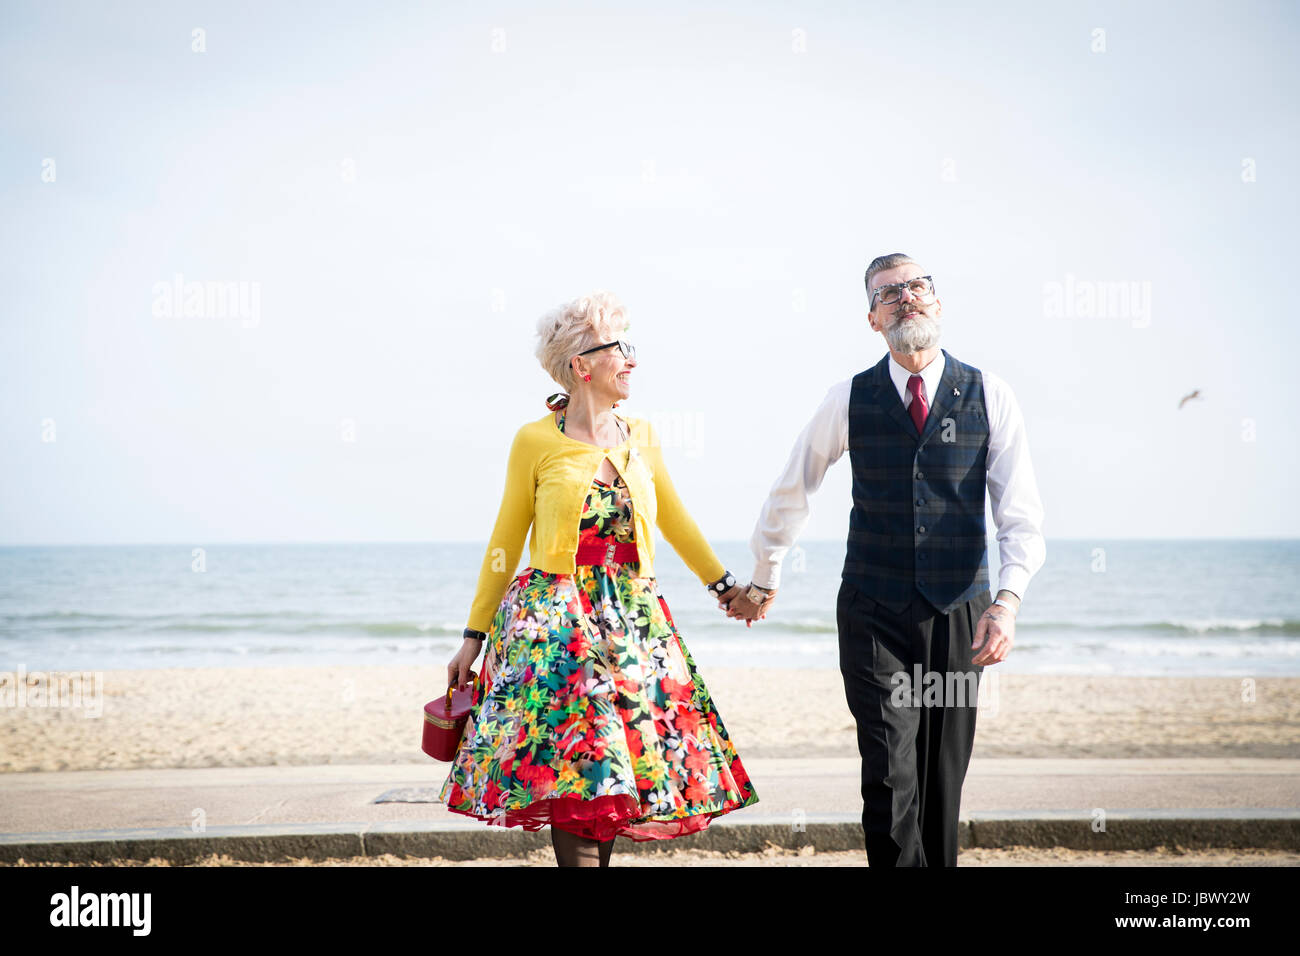 Style années 50 vintage couple holding hands and strolling on beach Banque D'Images